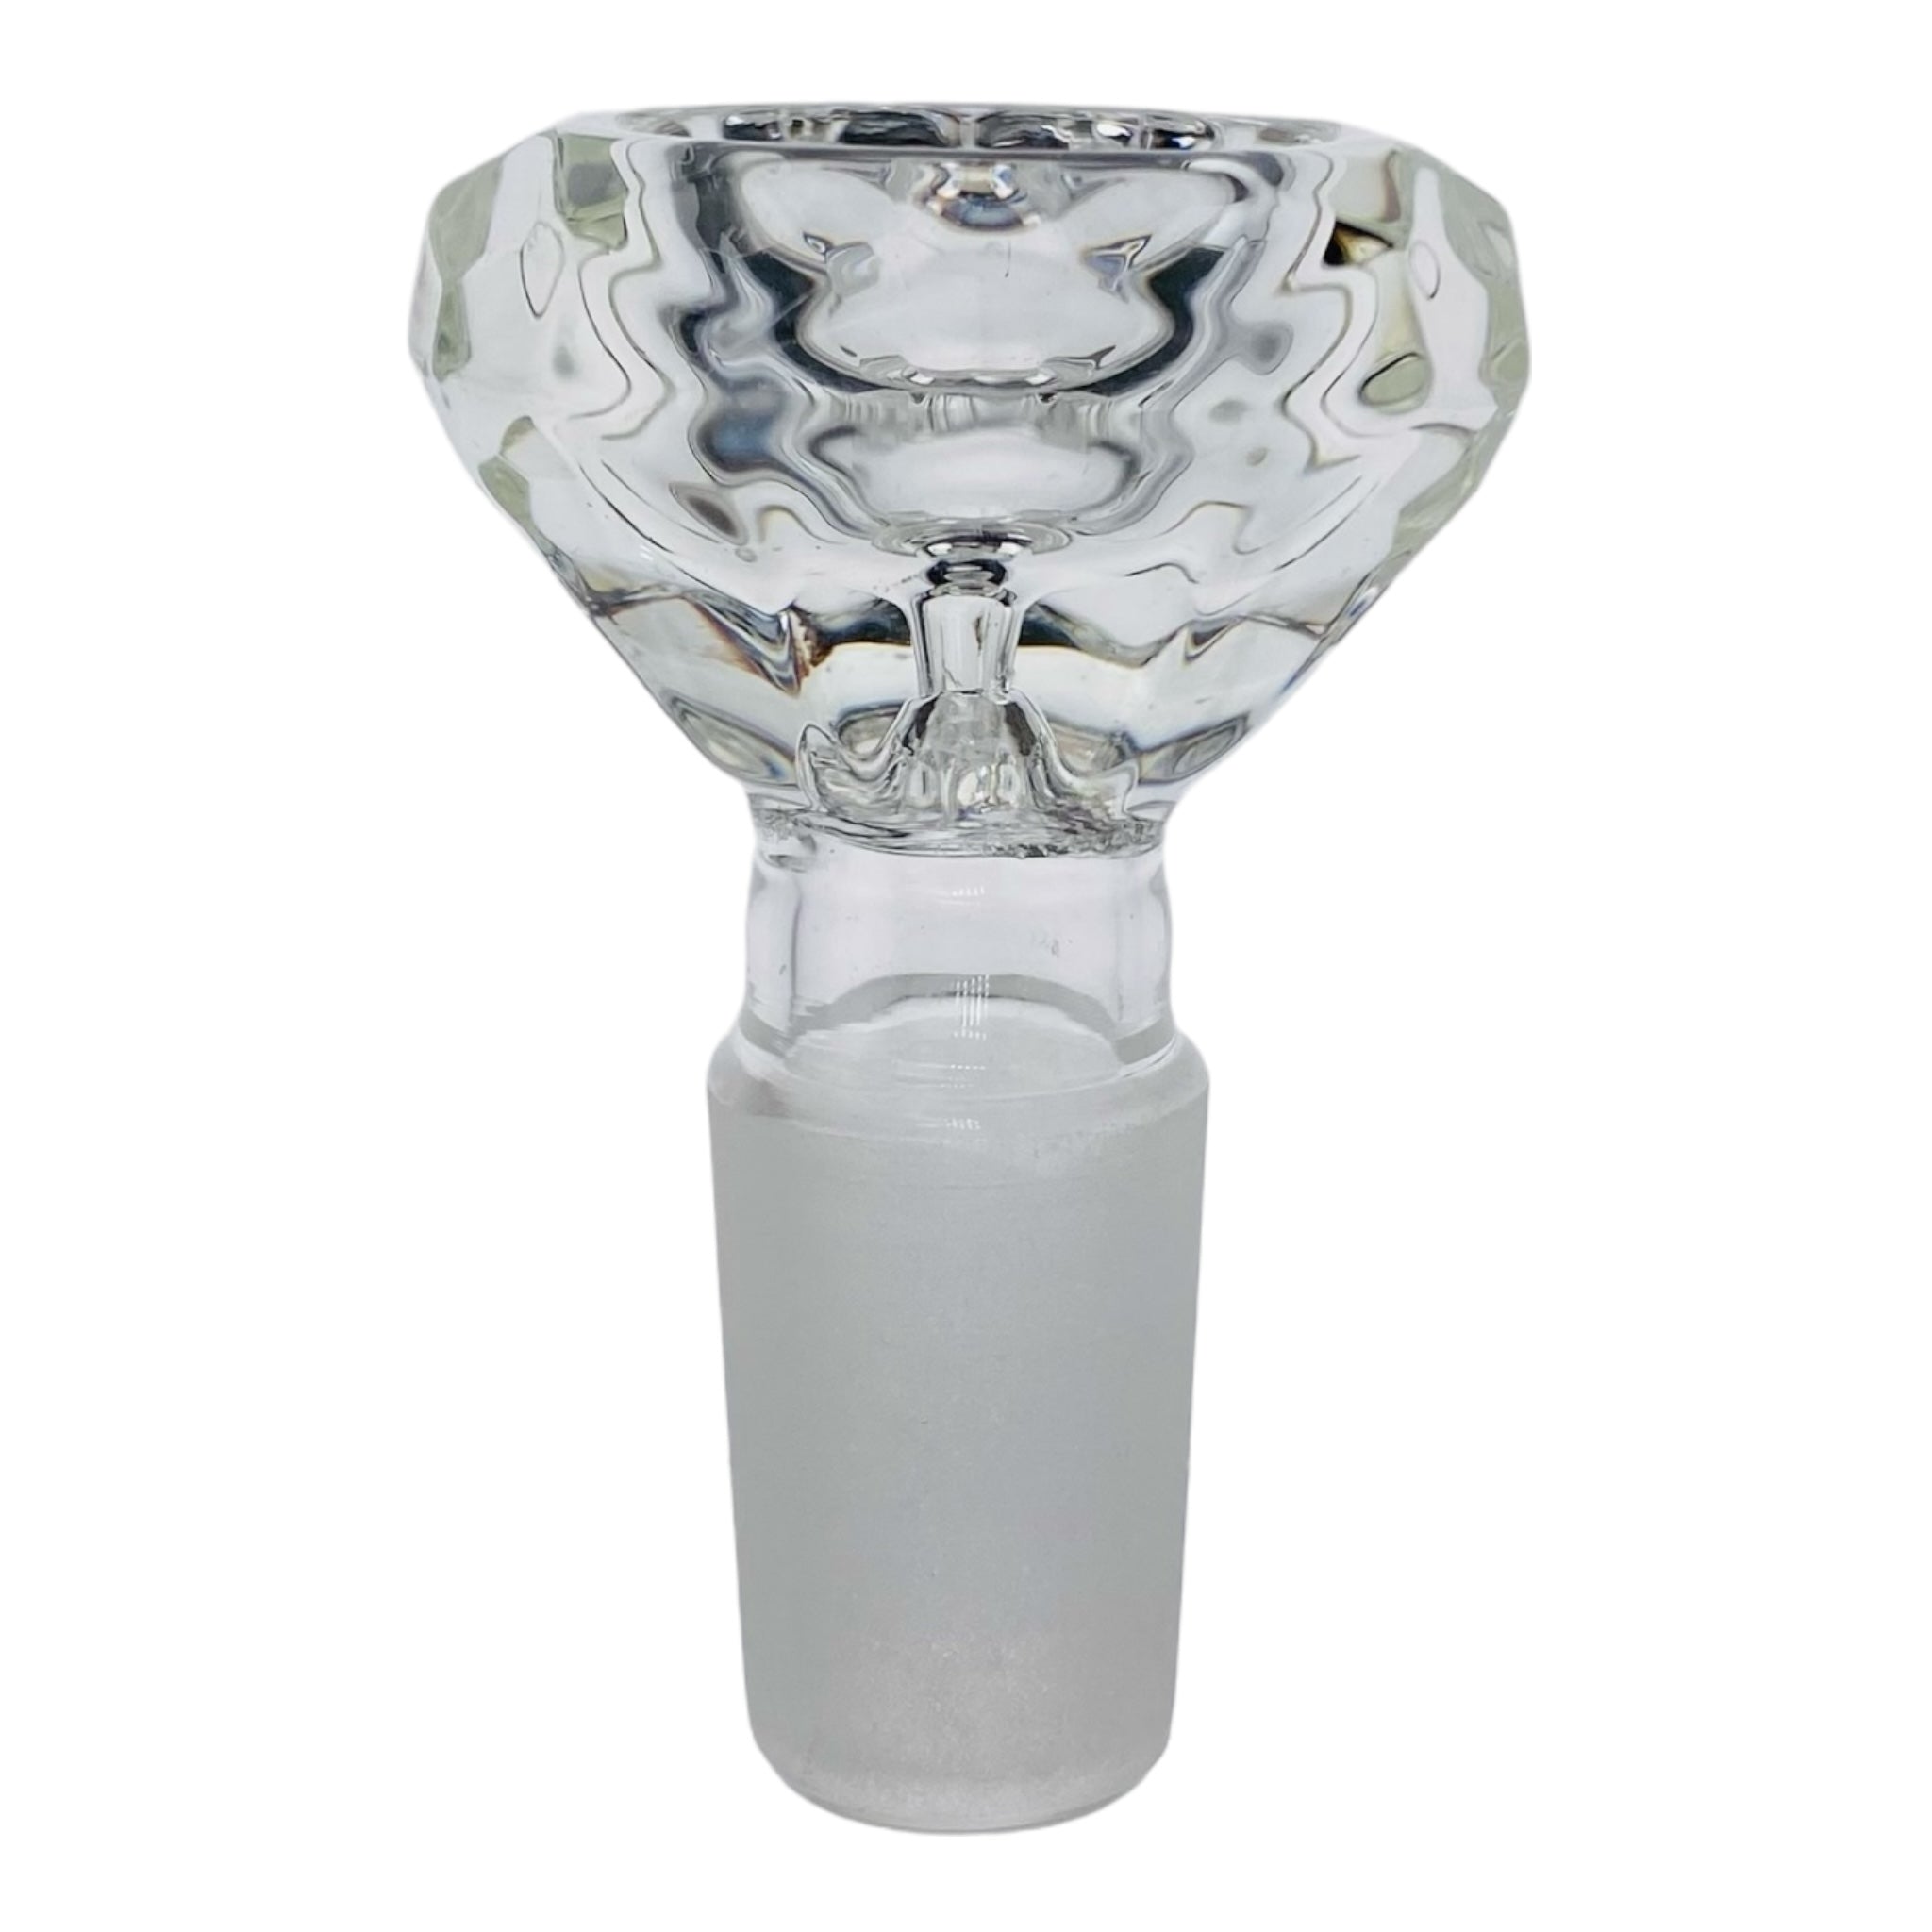 18mm Flower Bowl - Faceted Diamond Glass Bong Bowl Piece - Clear